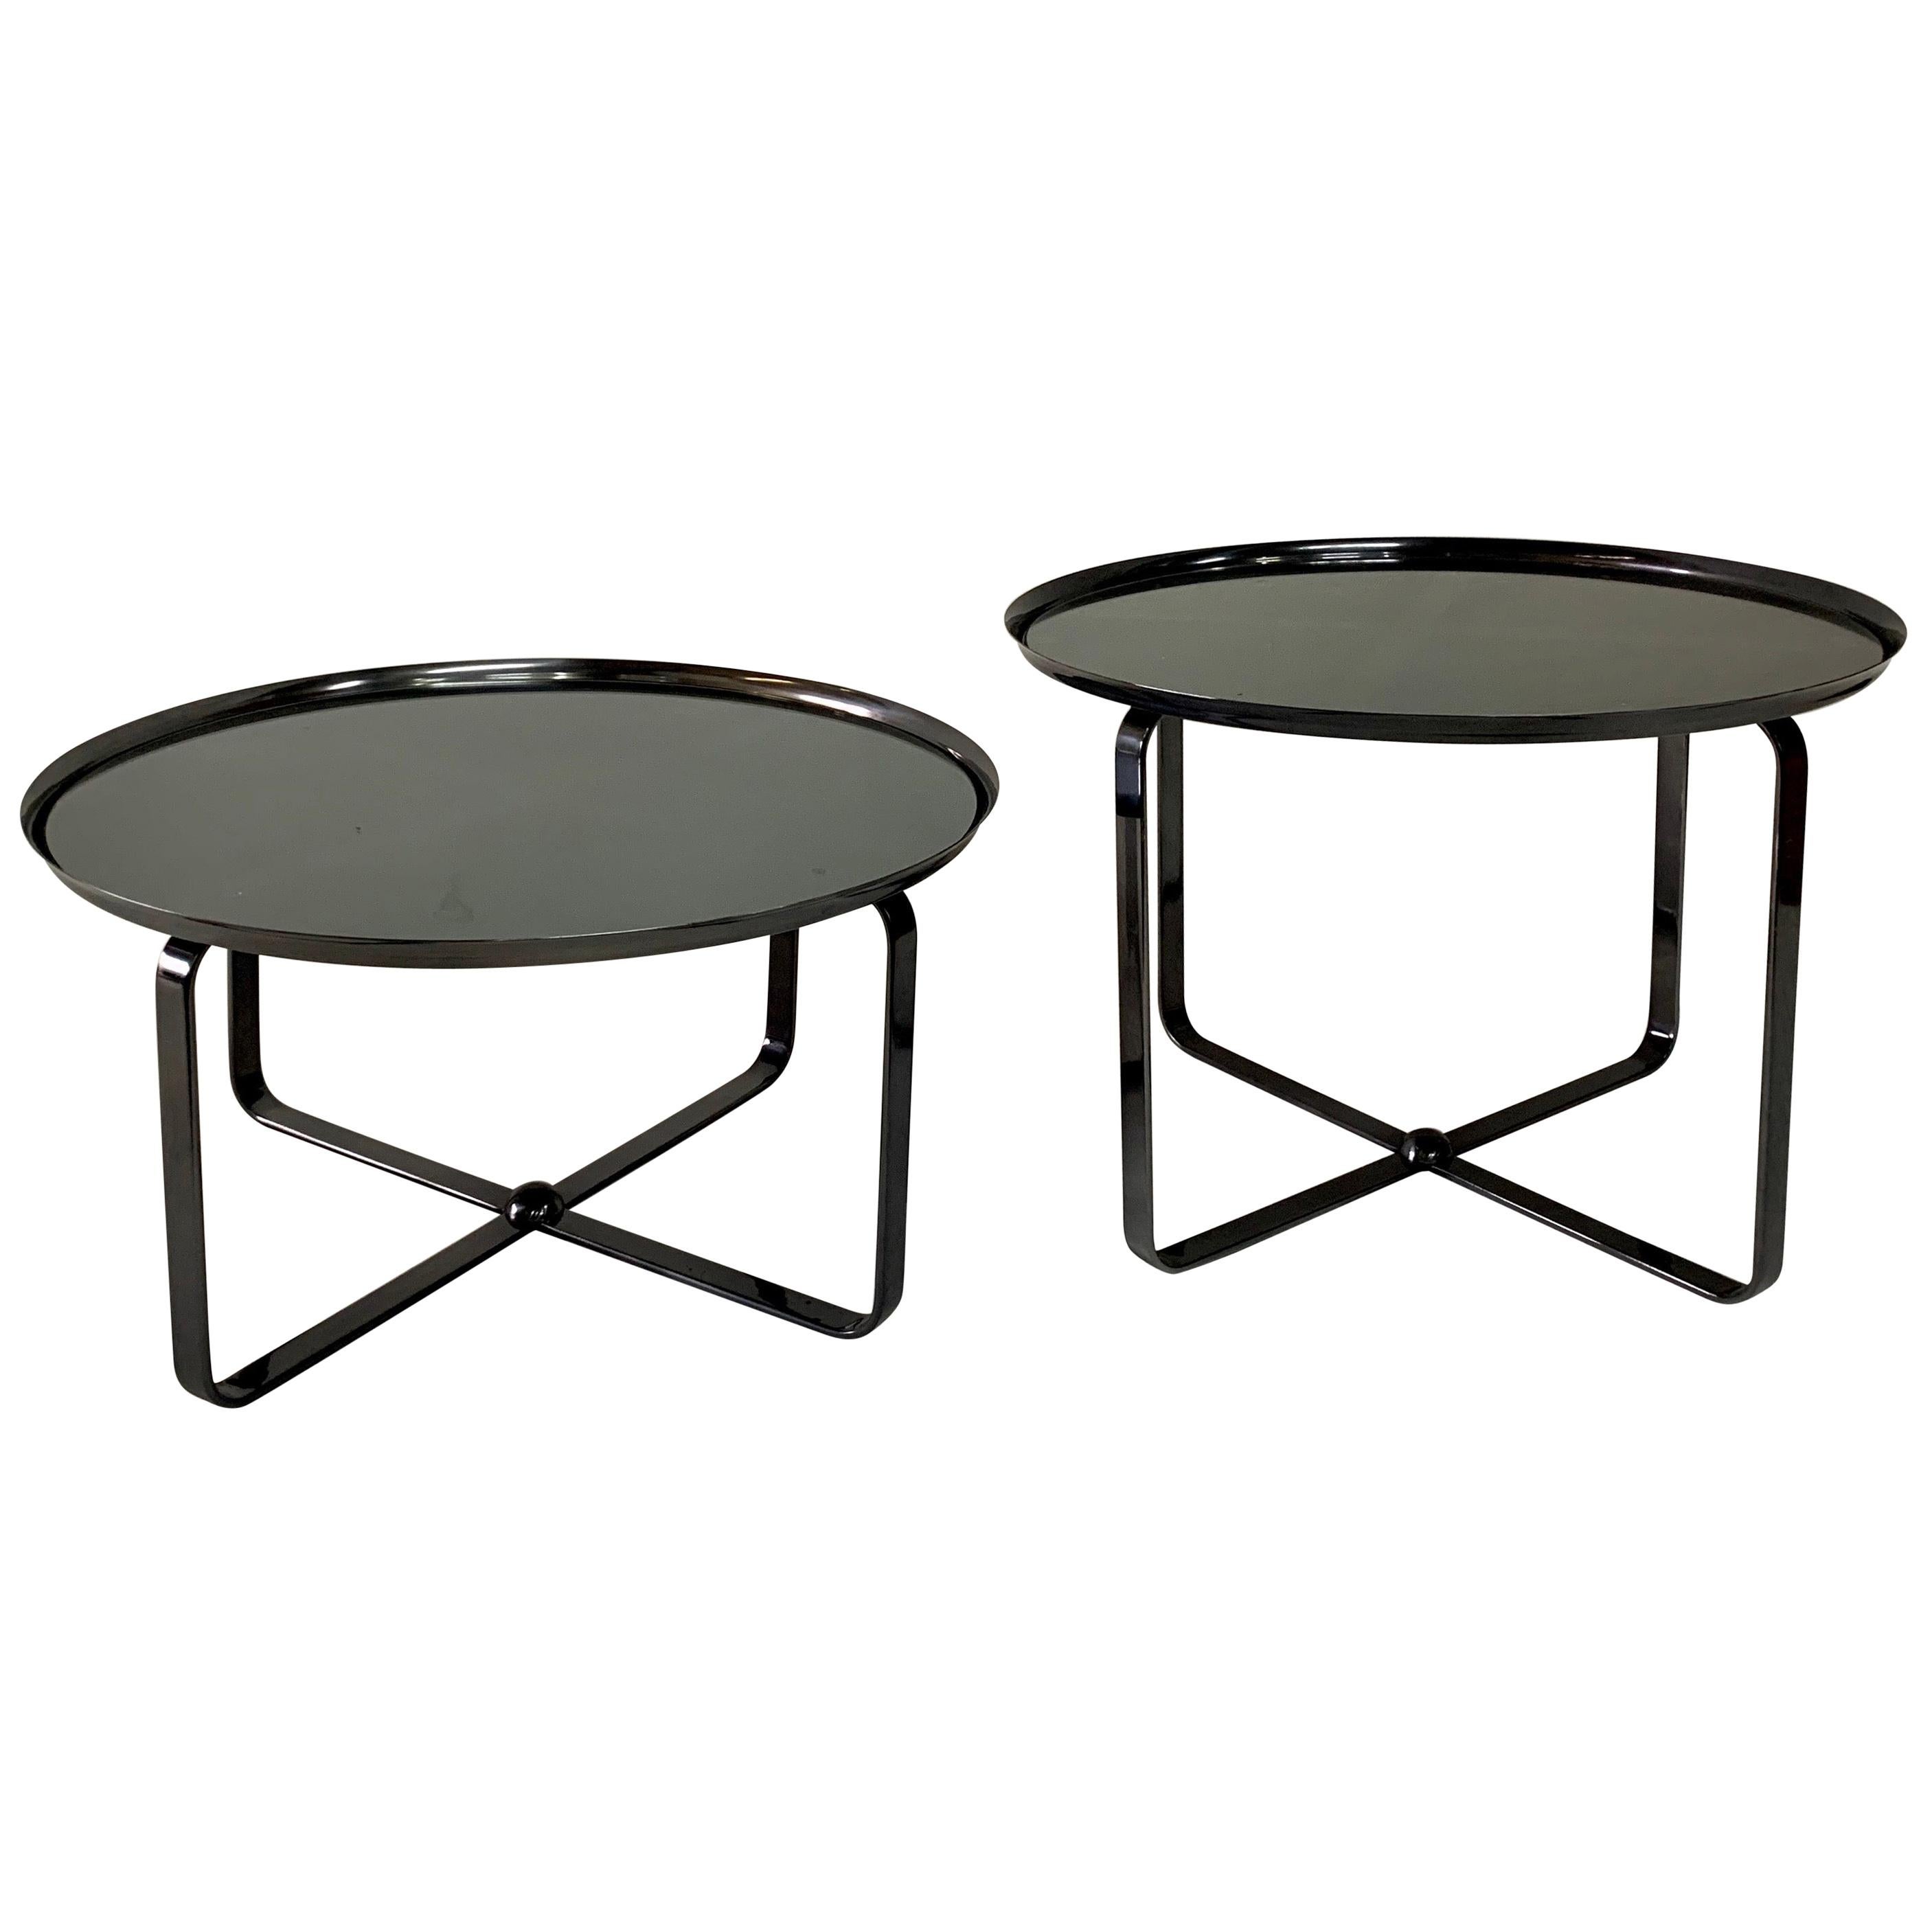 Pewter Finish Low Tiered Side Tables, Pair